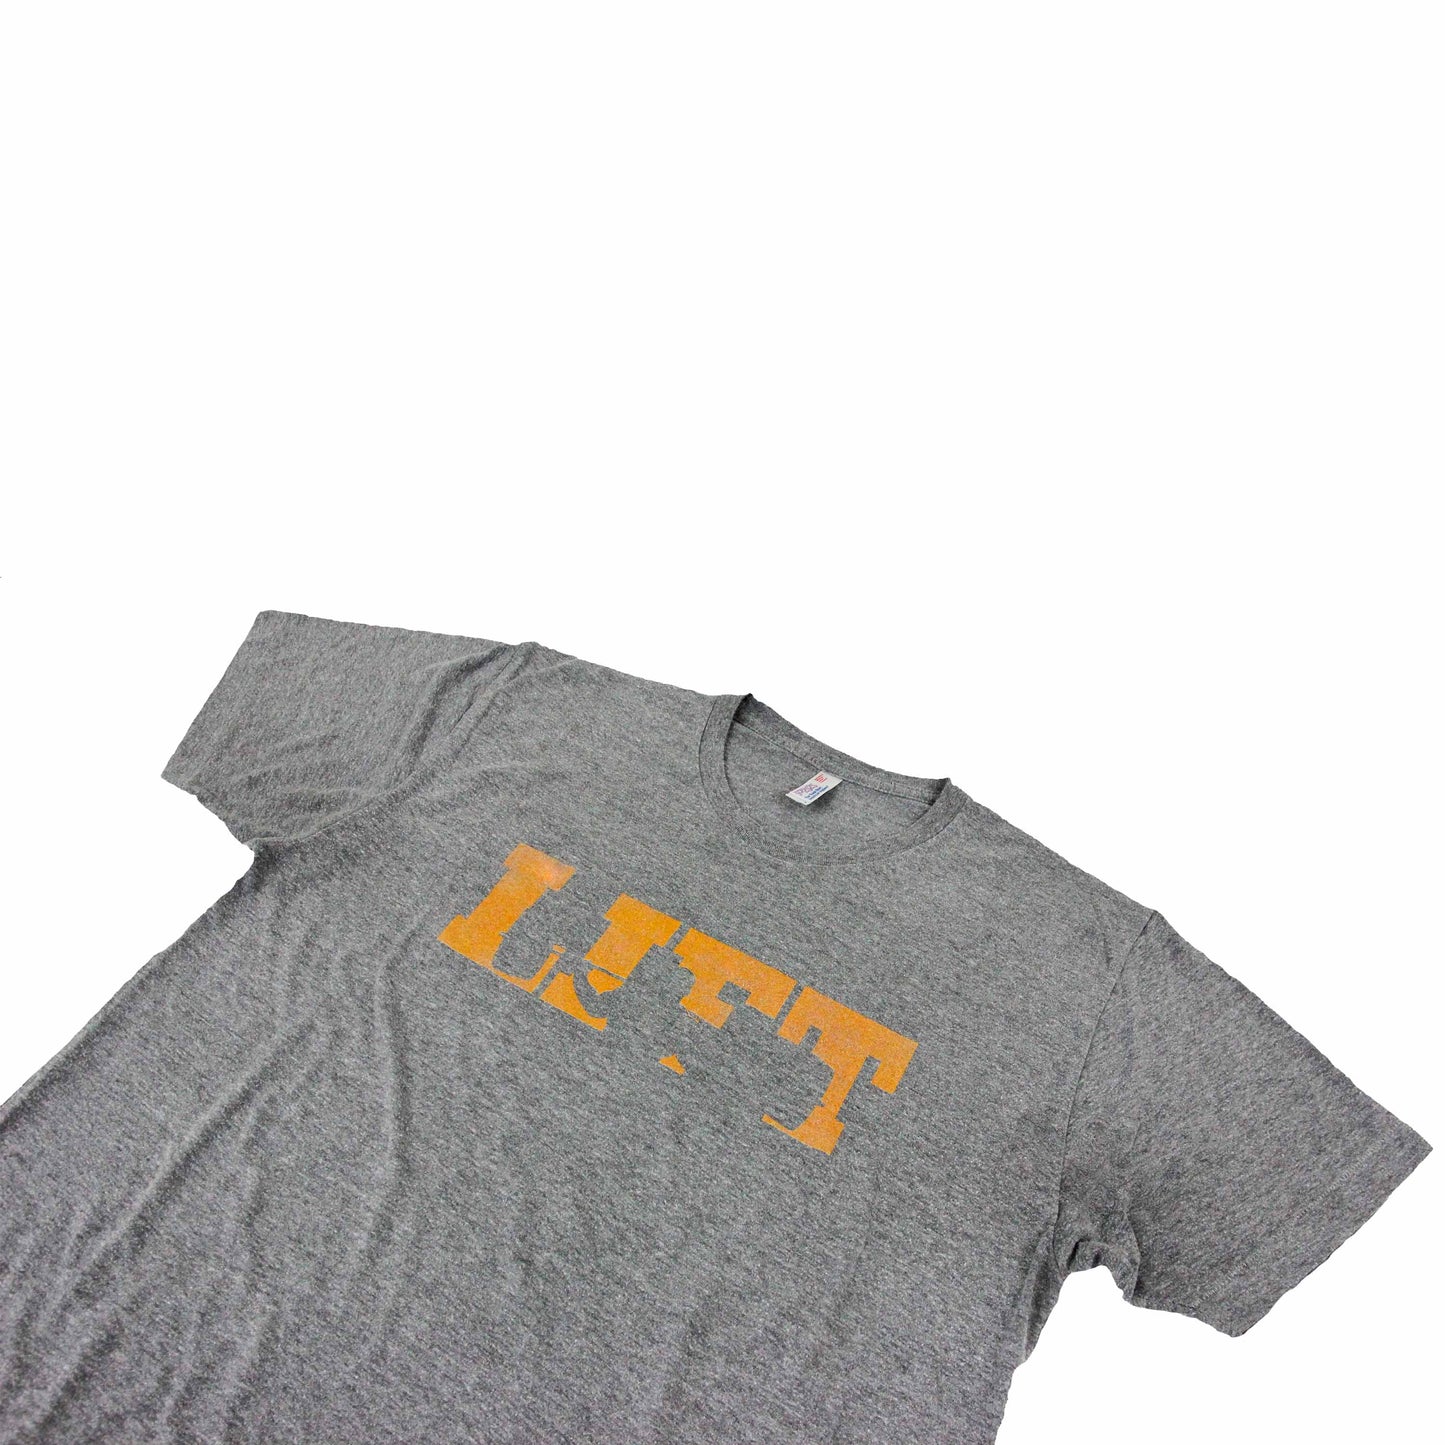 The LIFT weightlifting shirt | Iron Strong Apparel